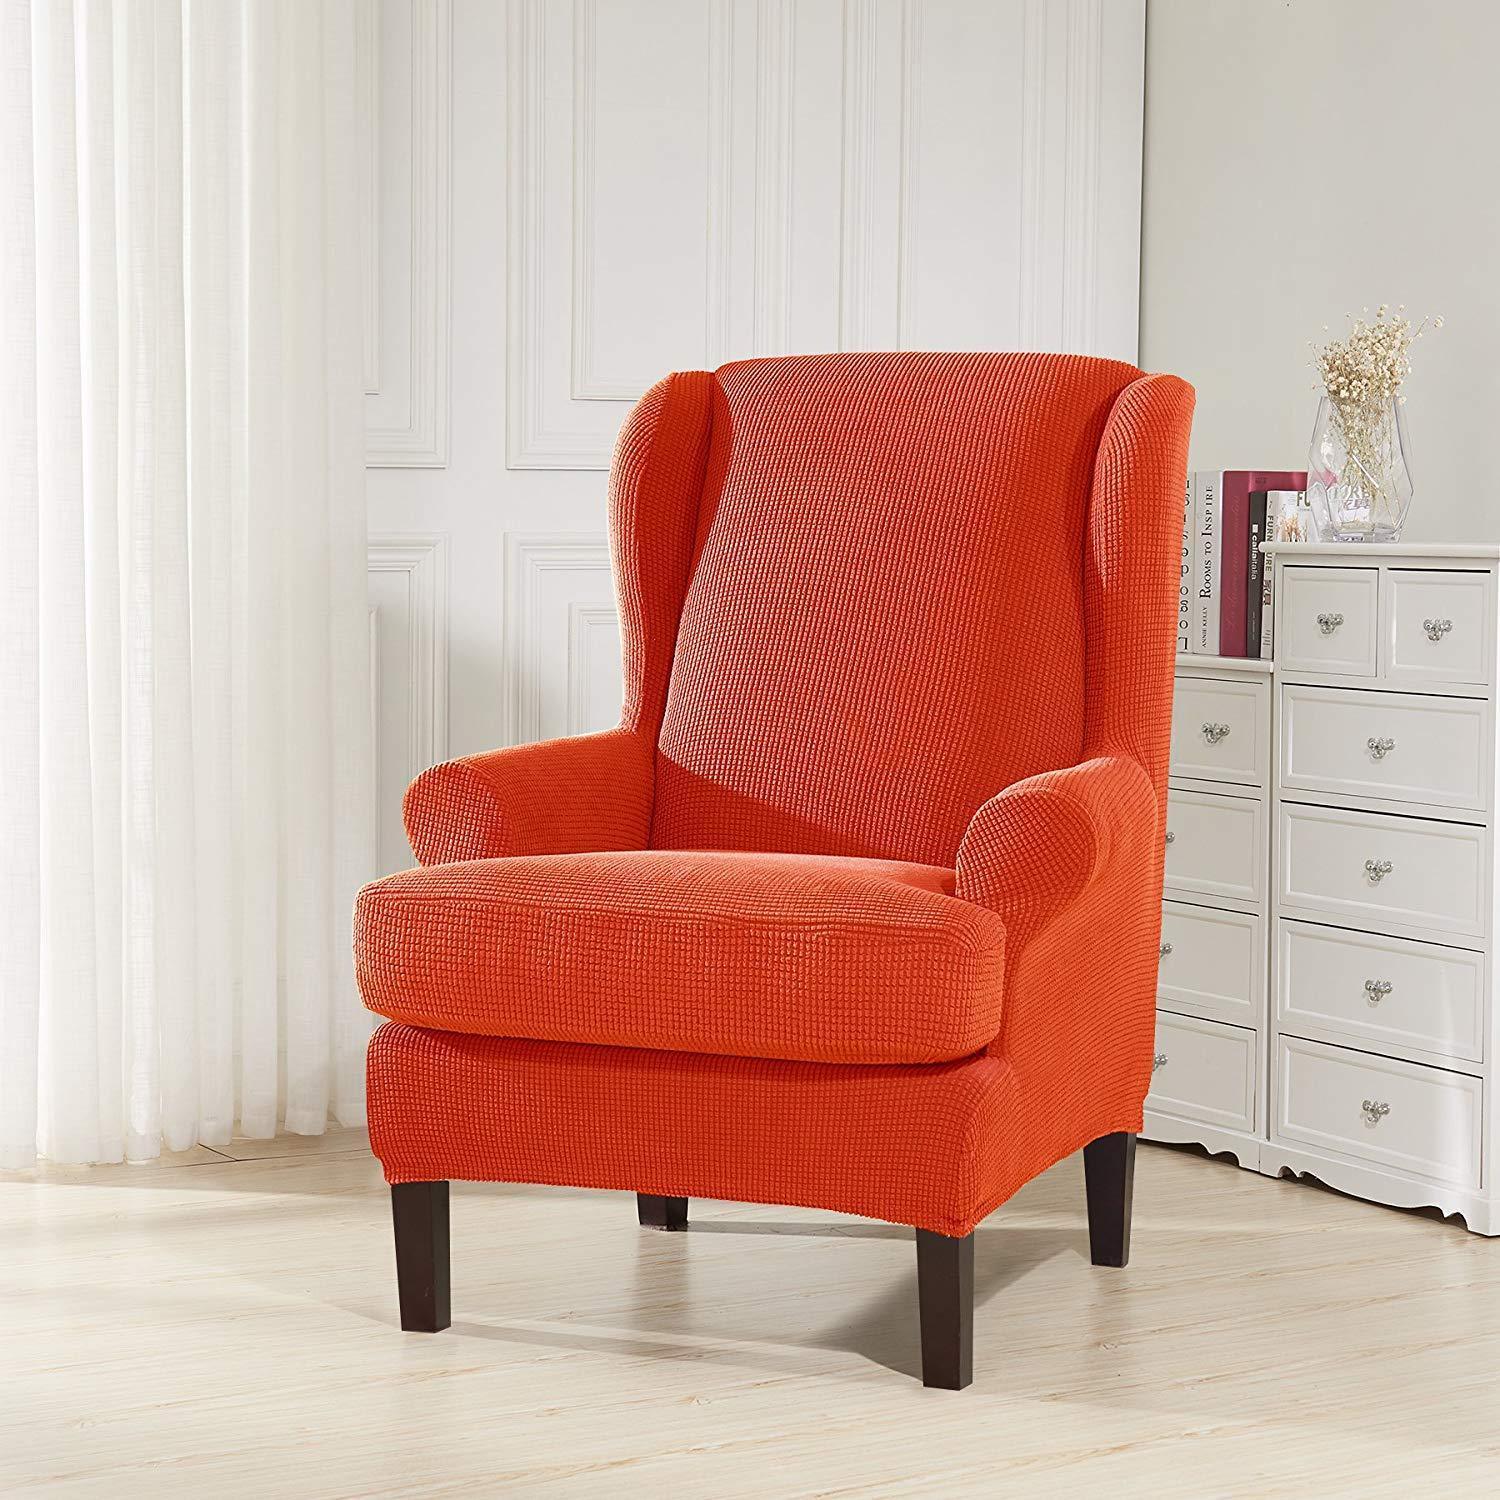 Stretchable Recliner Cover - Pretty Little Wish.com